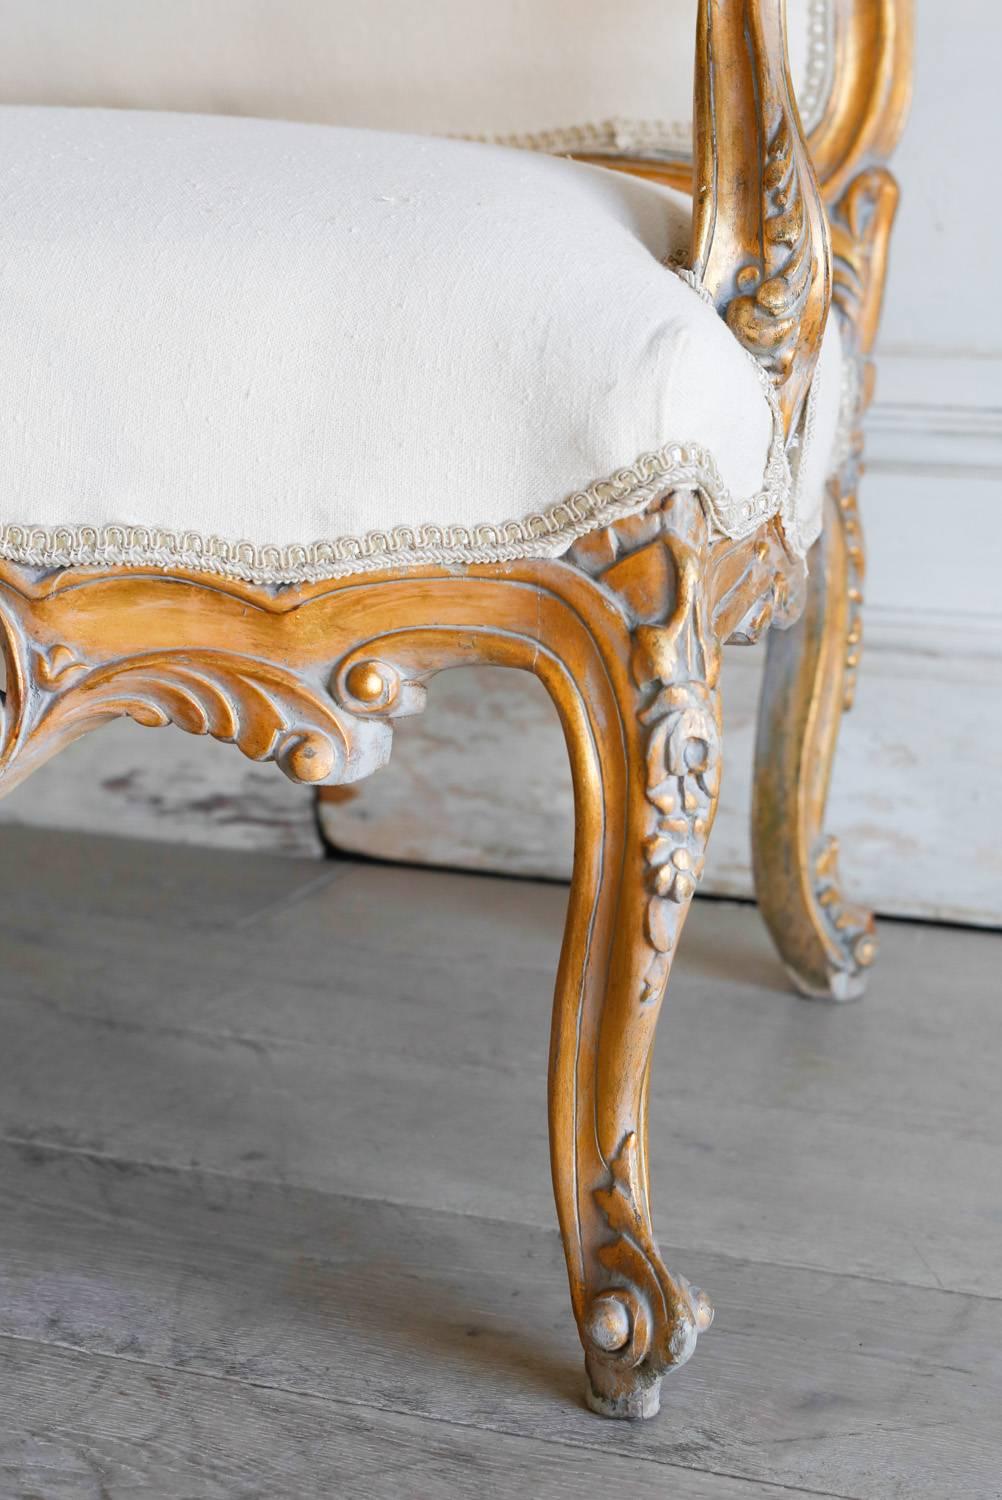 Stunning vintage settee in gilt with an elaborate and opulent ajouree carvings. Large central crest flanked by carvings in floral motifs along the backrest. All three aprons feature elaborate carved floral patterns as well as carvings on the Louis